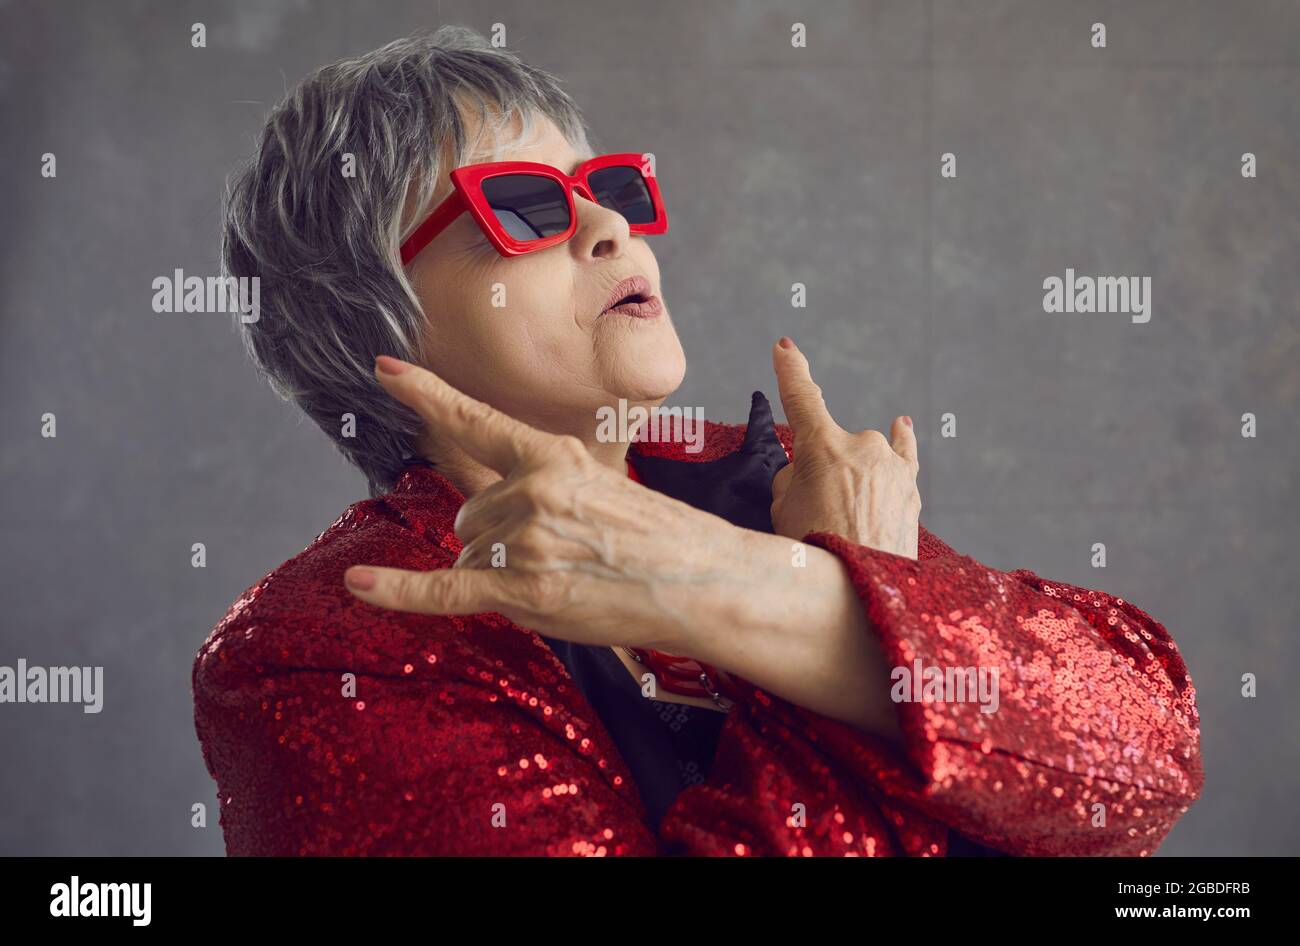 Senior fashionable woman star shows sign of horns with hands close up Stock Photo